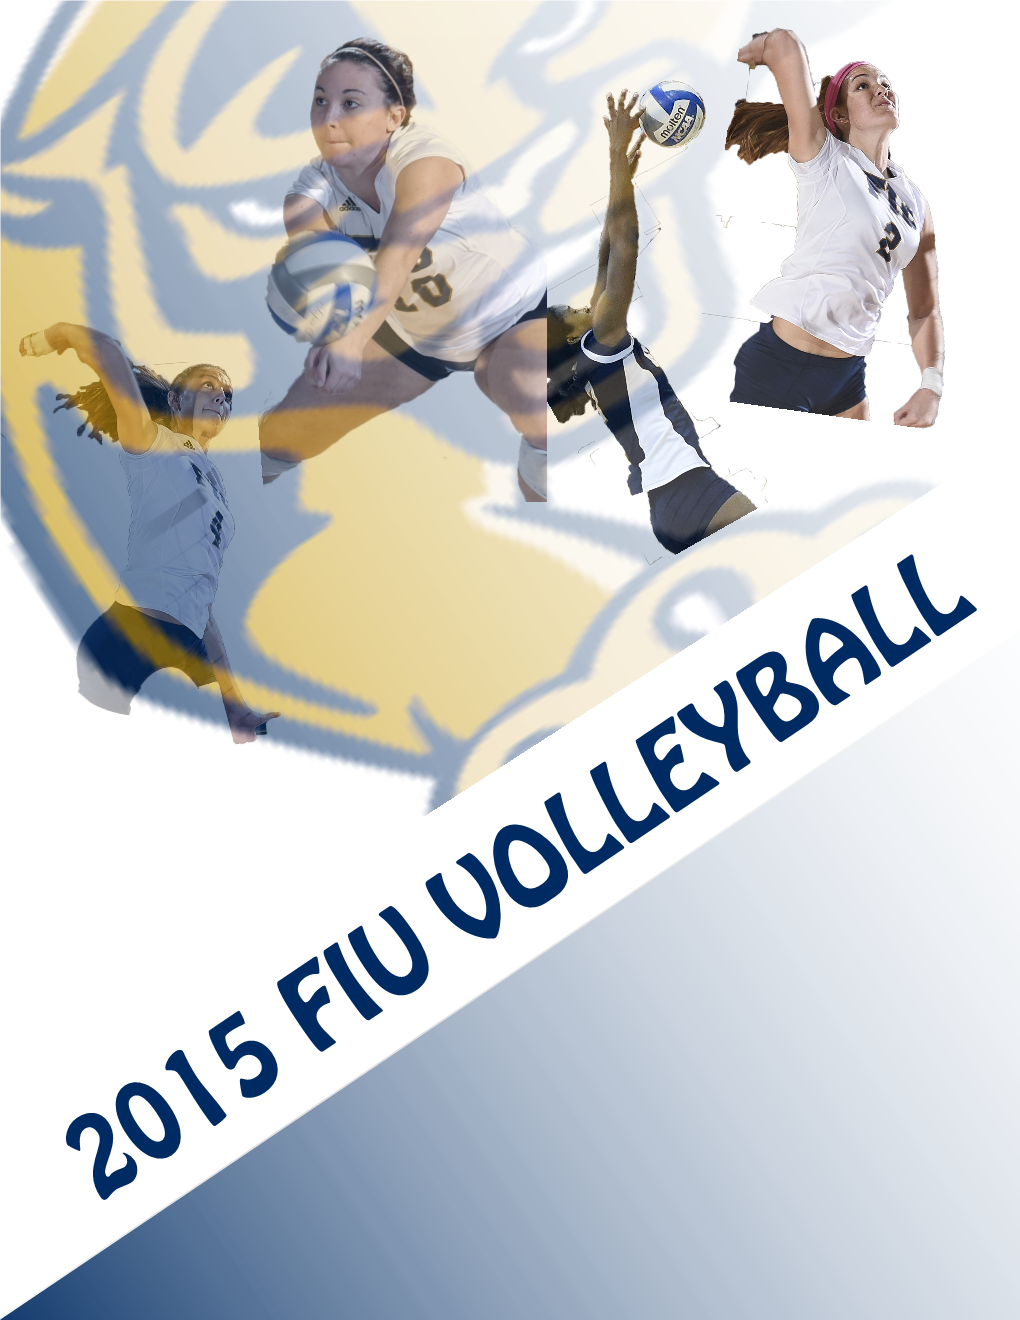 2015 FIU VOLLEYBALL TABLE of CONTENTS QUICK FACTS FIU VOLLEYBALL Quick Facts